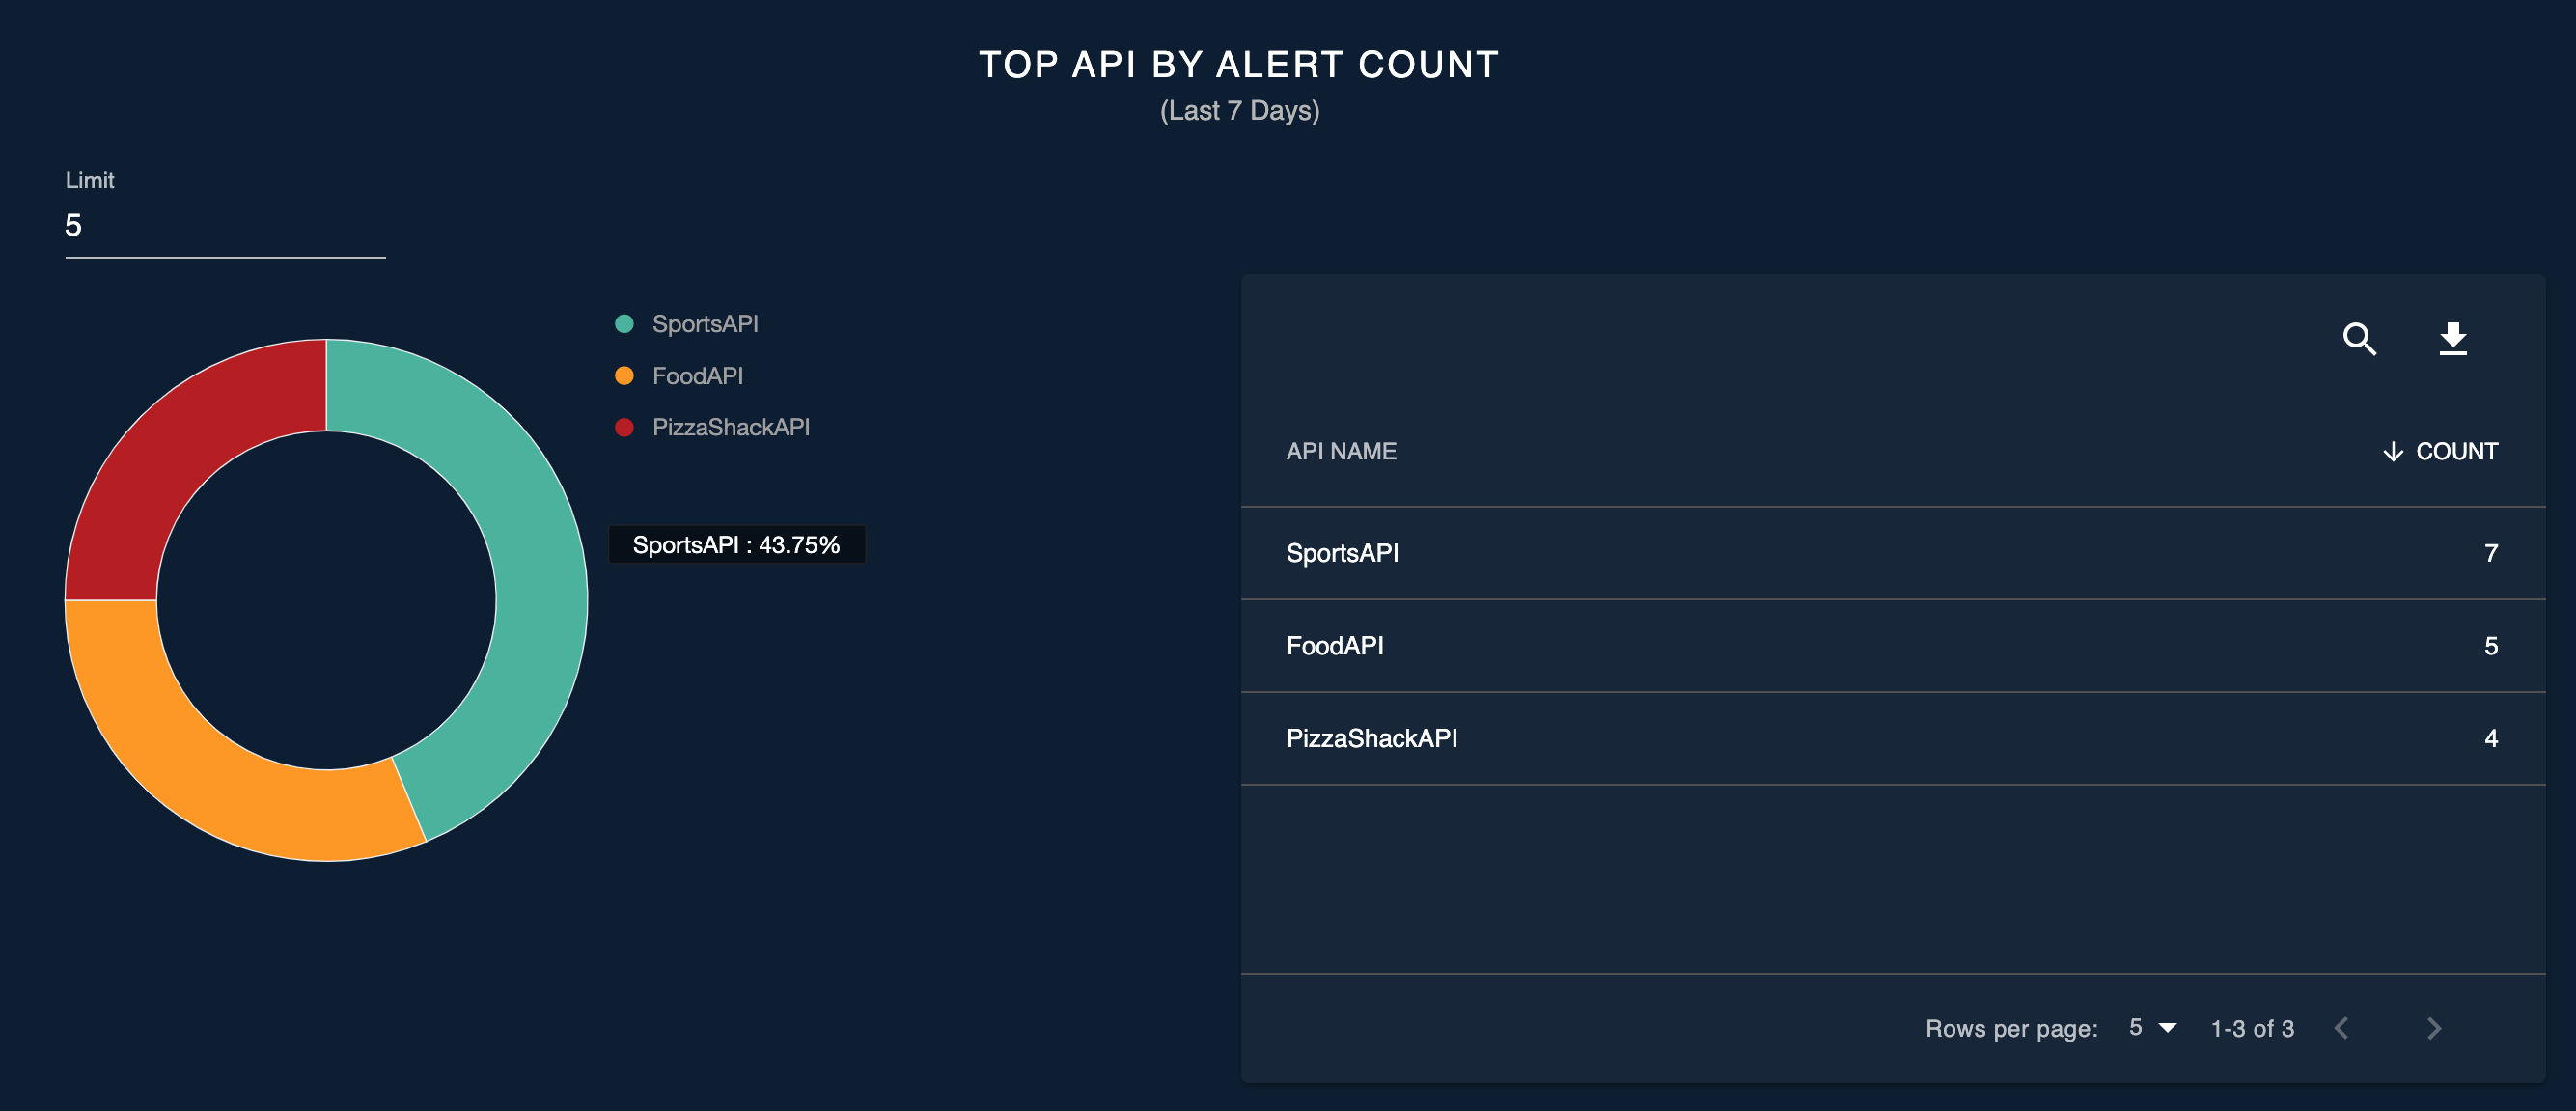 Top API by alert count